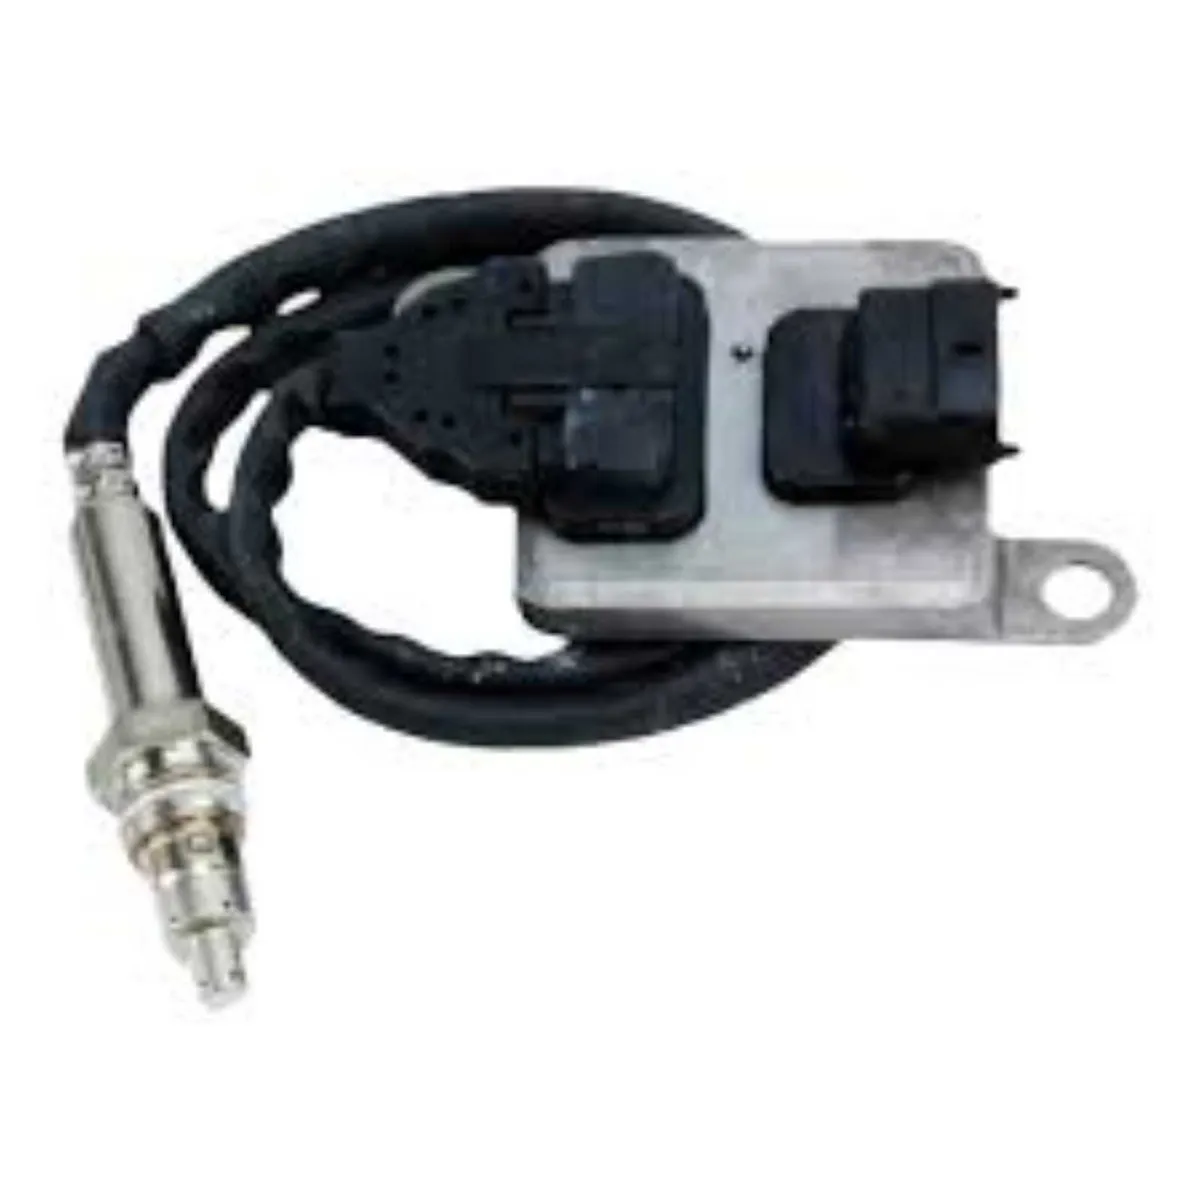 NOX SENSORS & EXHAUST SYSTEMS FOR VOLVO & SCANIA - Image 1